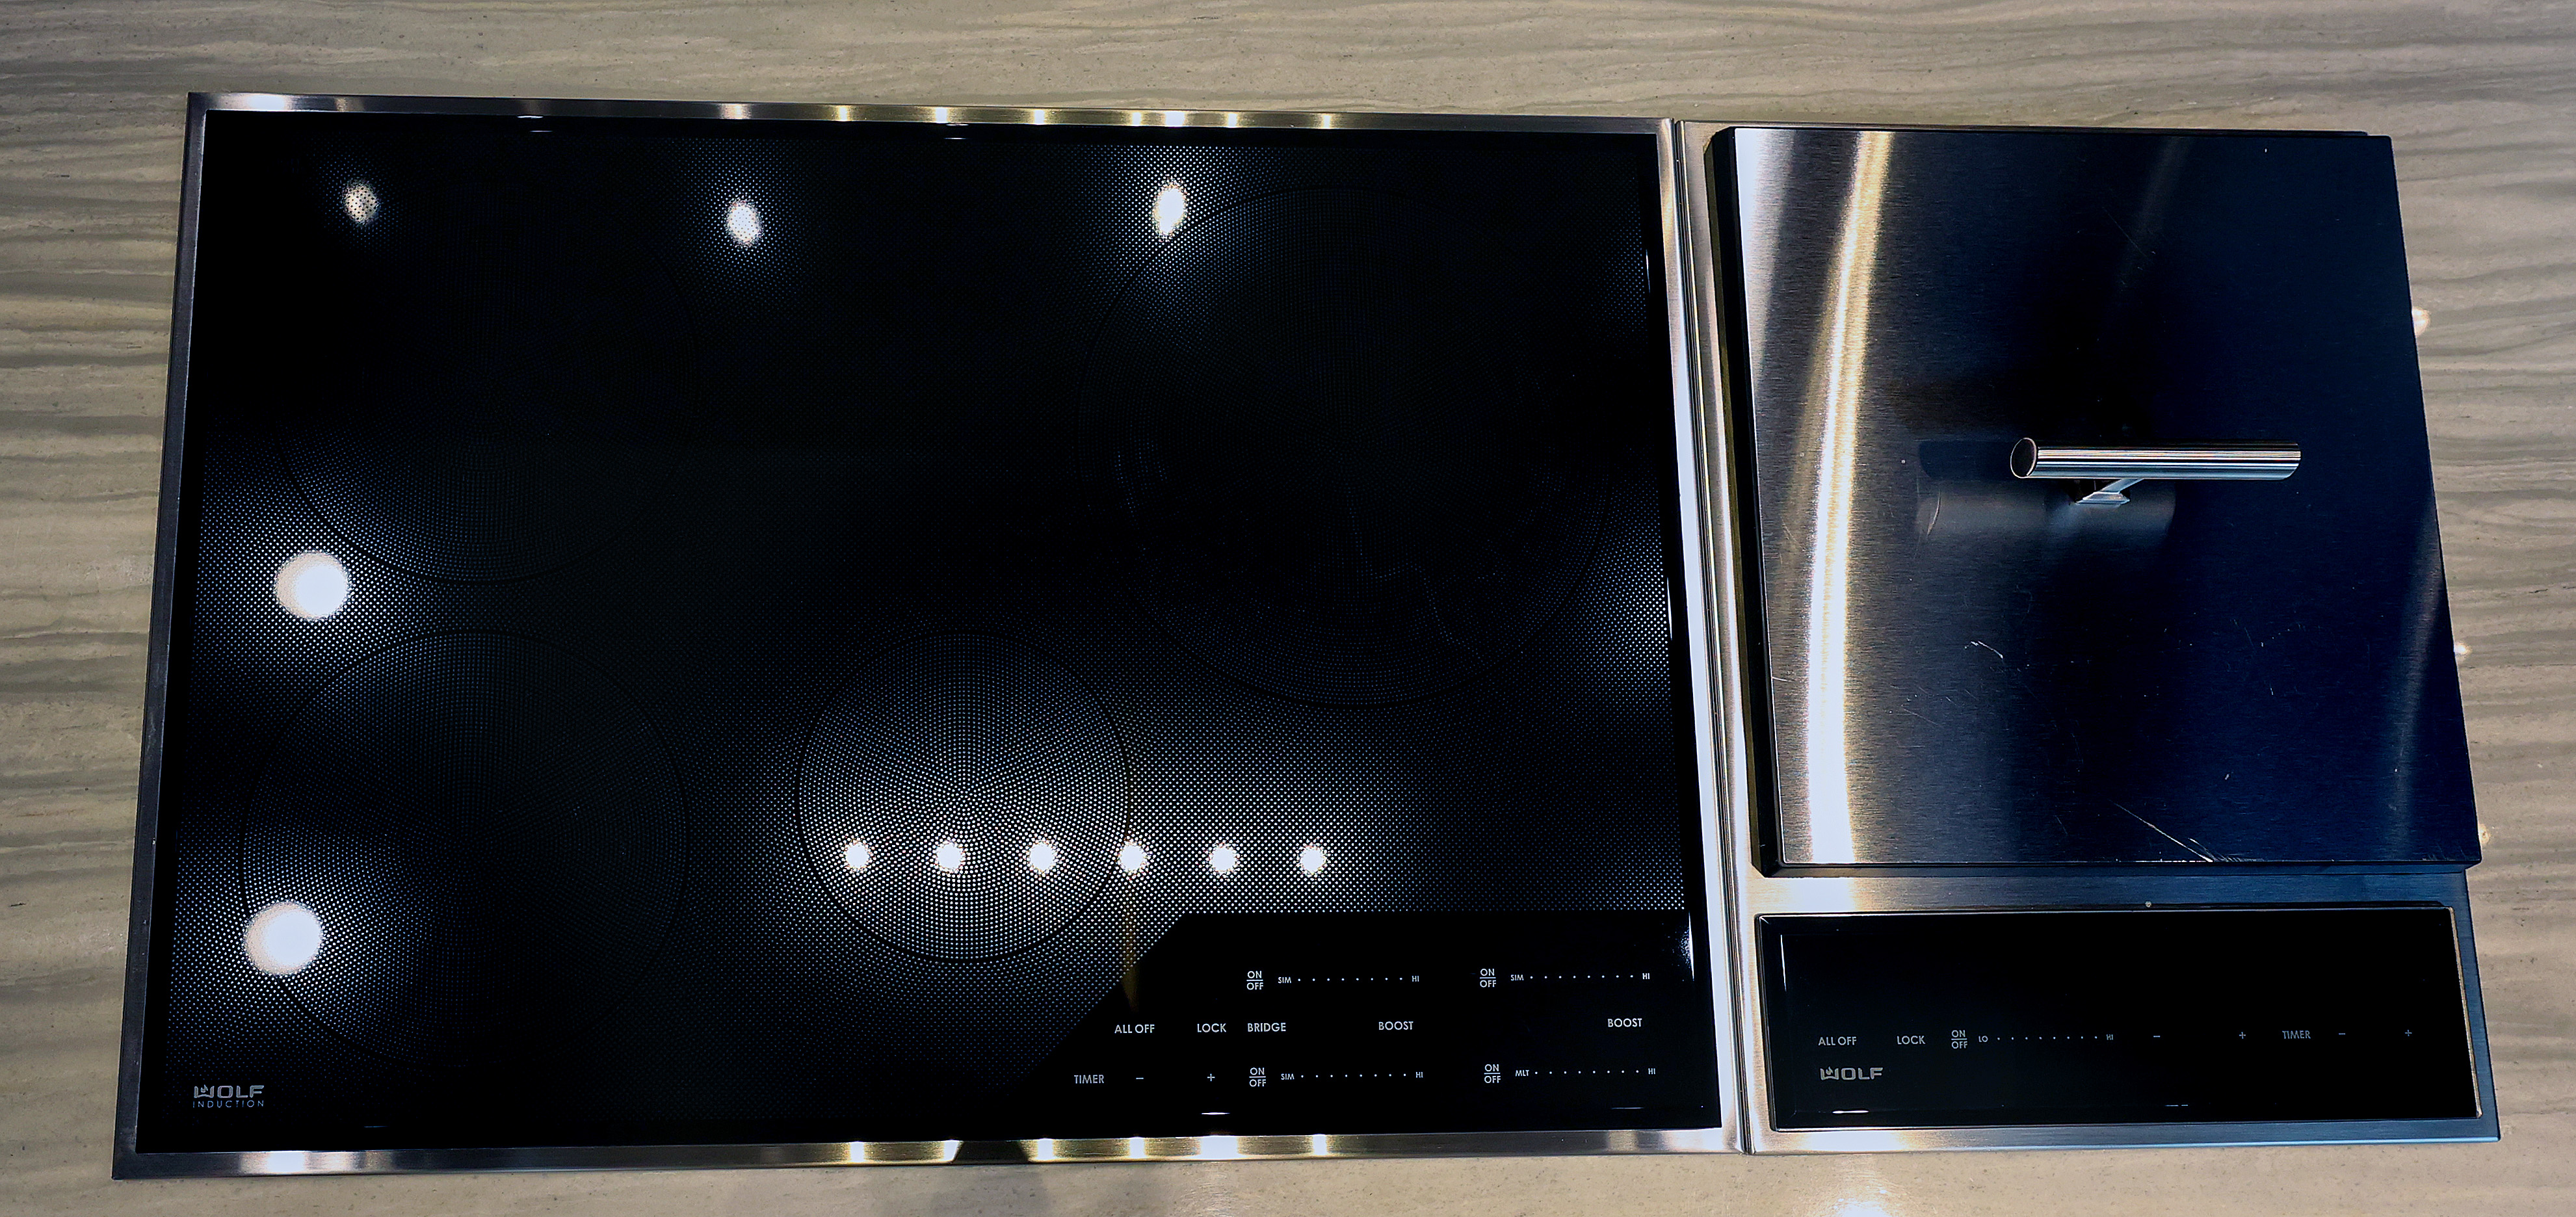 A very hot topic: Everything you need to know about induction cooktops -  The Boston Globe